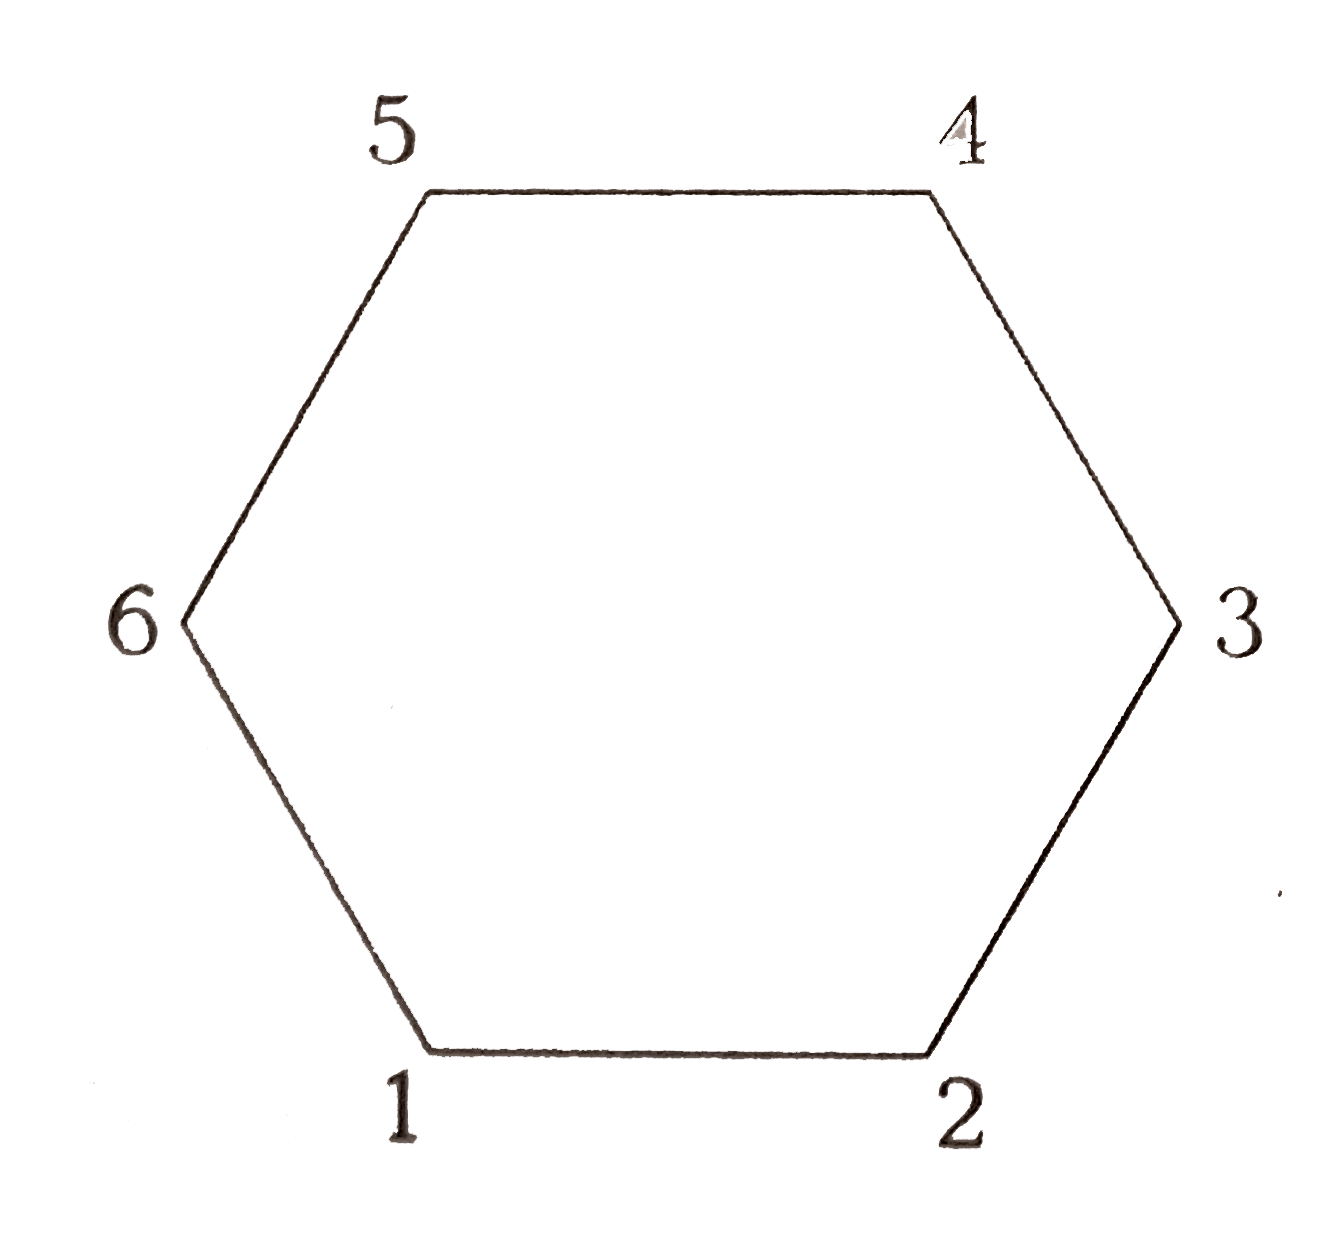 Assertion : Four point masses each of mass m are placed at points 1, 2, 3 and 6 of a regular hexagon of side a. Then the gravitational field at the centre of hexagon is (Gm)/(a^(2))      Reason : The field strength due to masses at 3 and 6 are cancelled out.